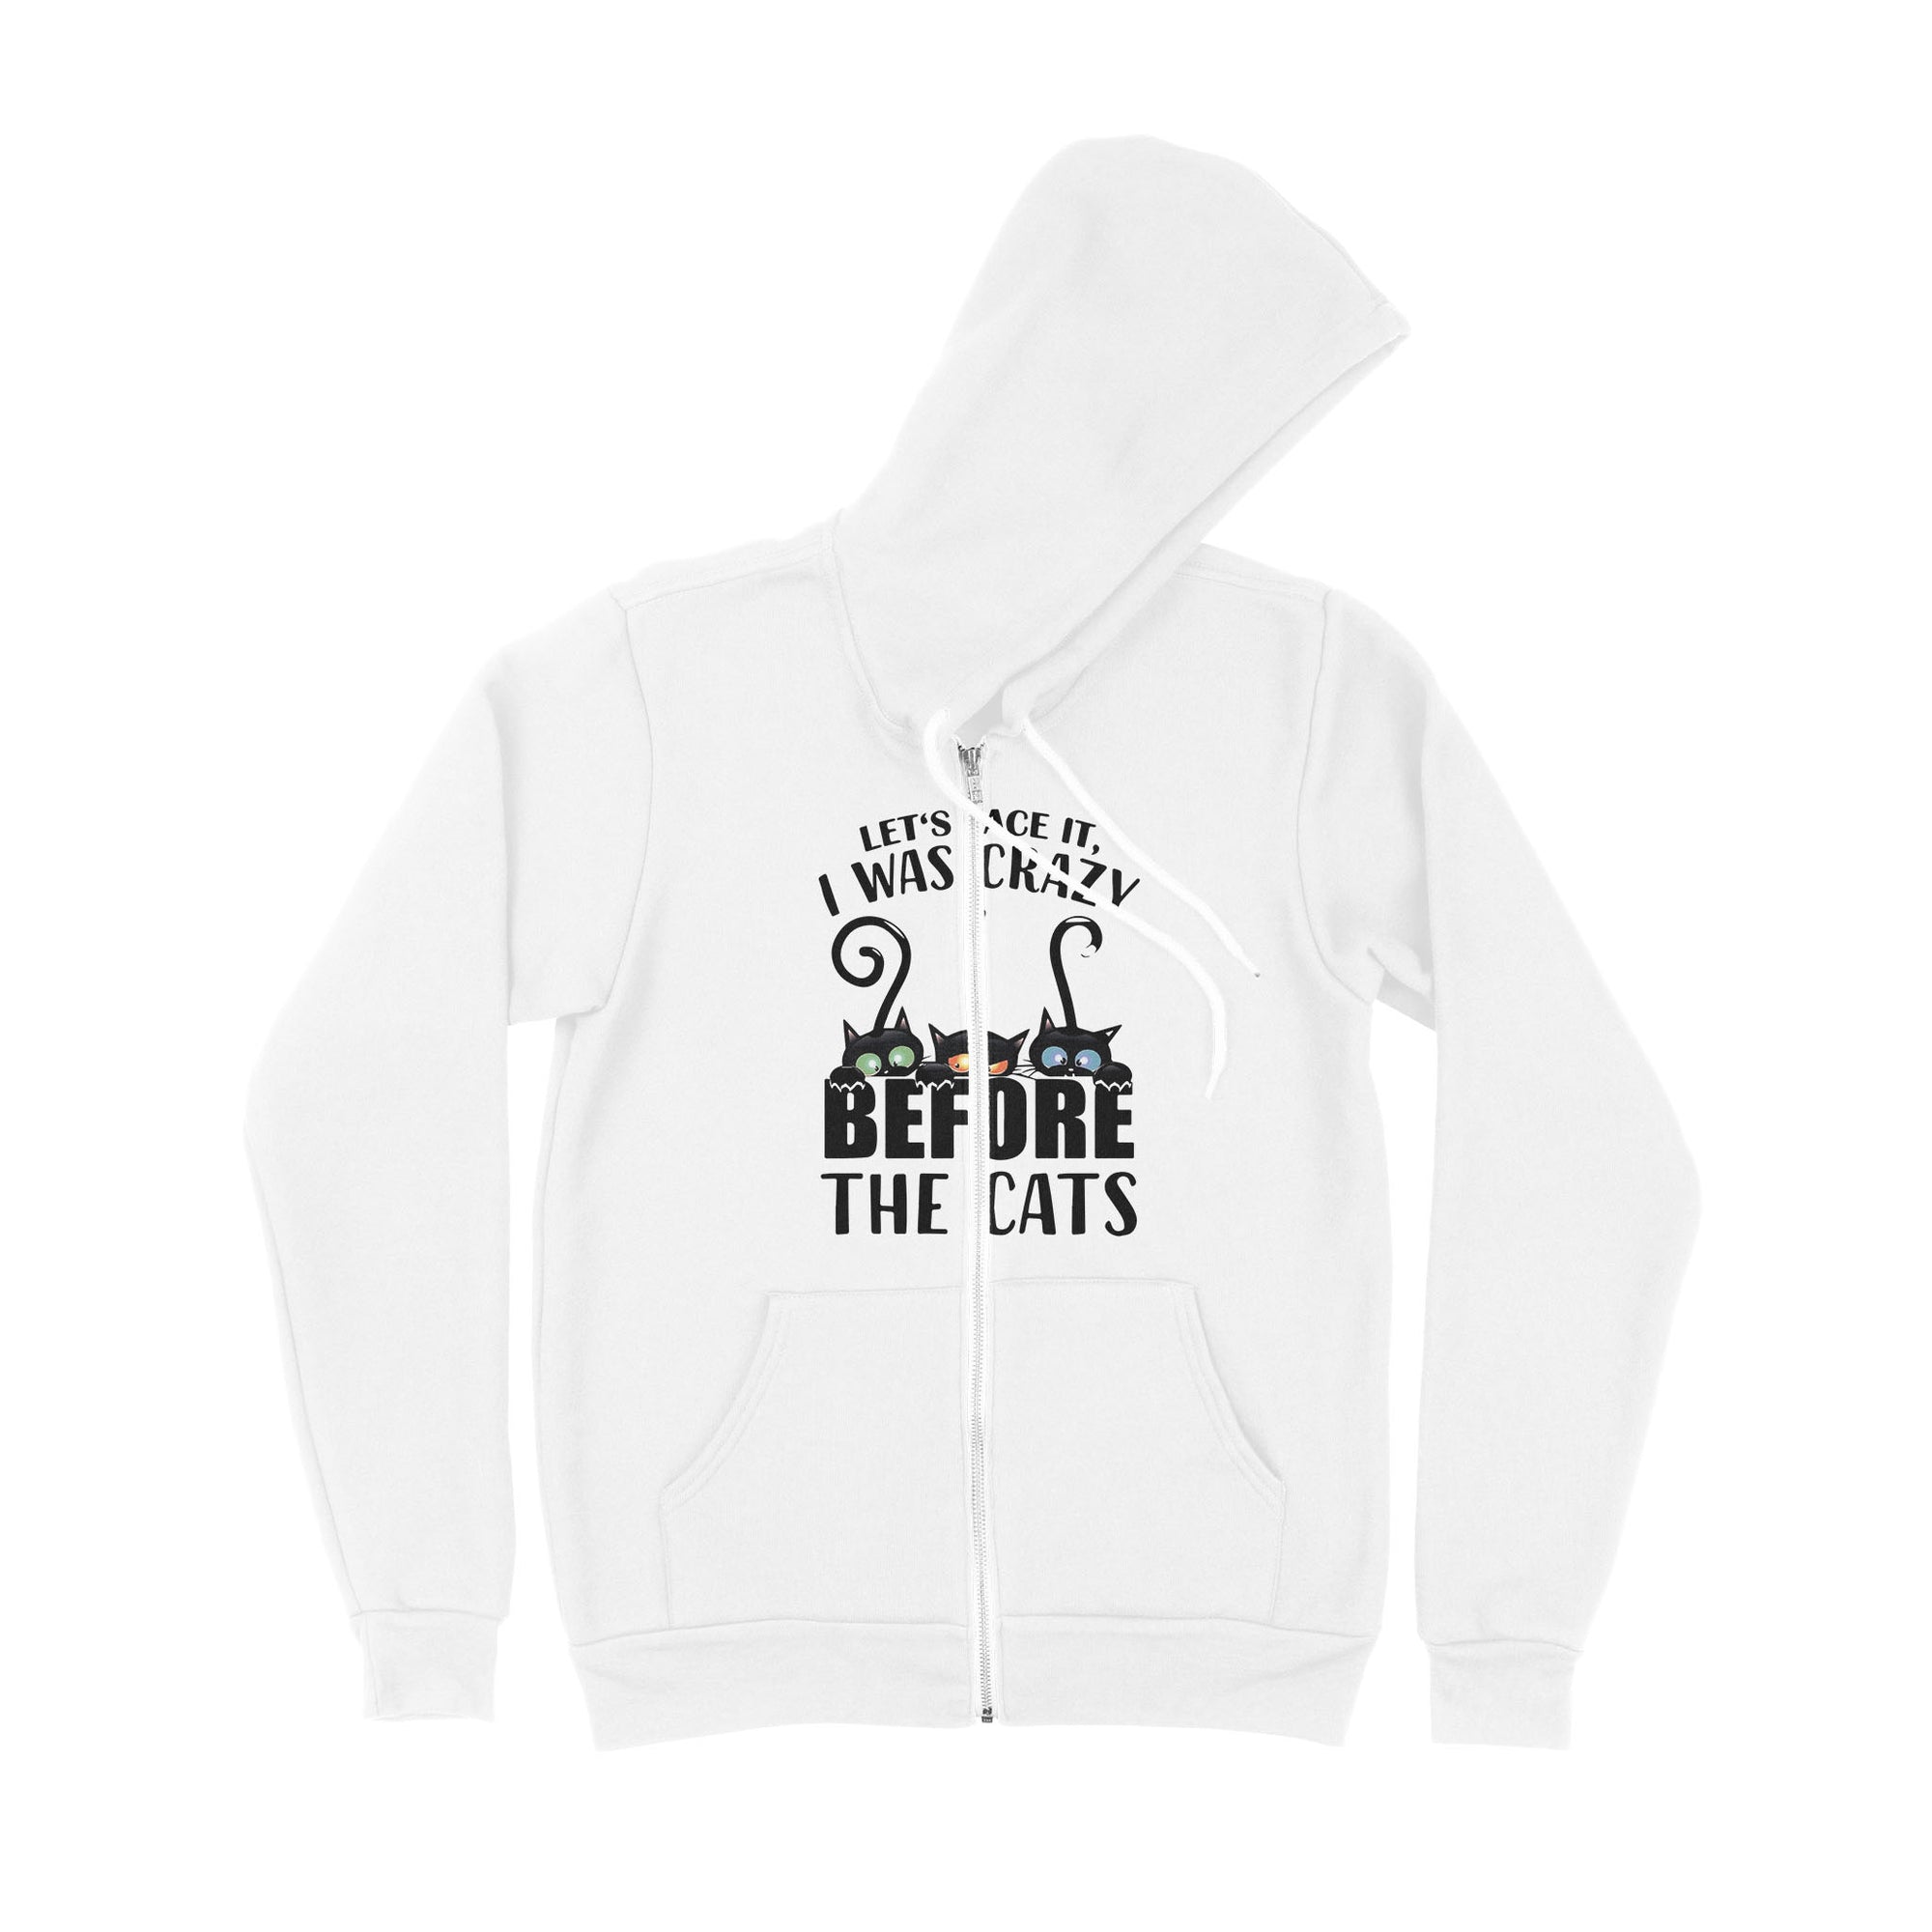 Let's Face It I Was Crazy Before The Cats - Premium Zip Hoodie